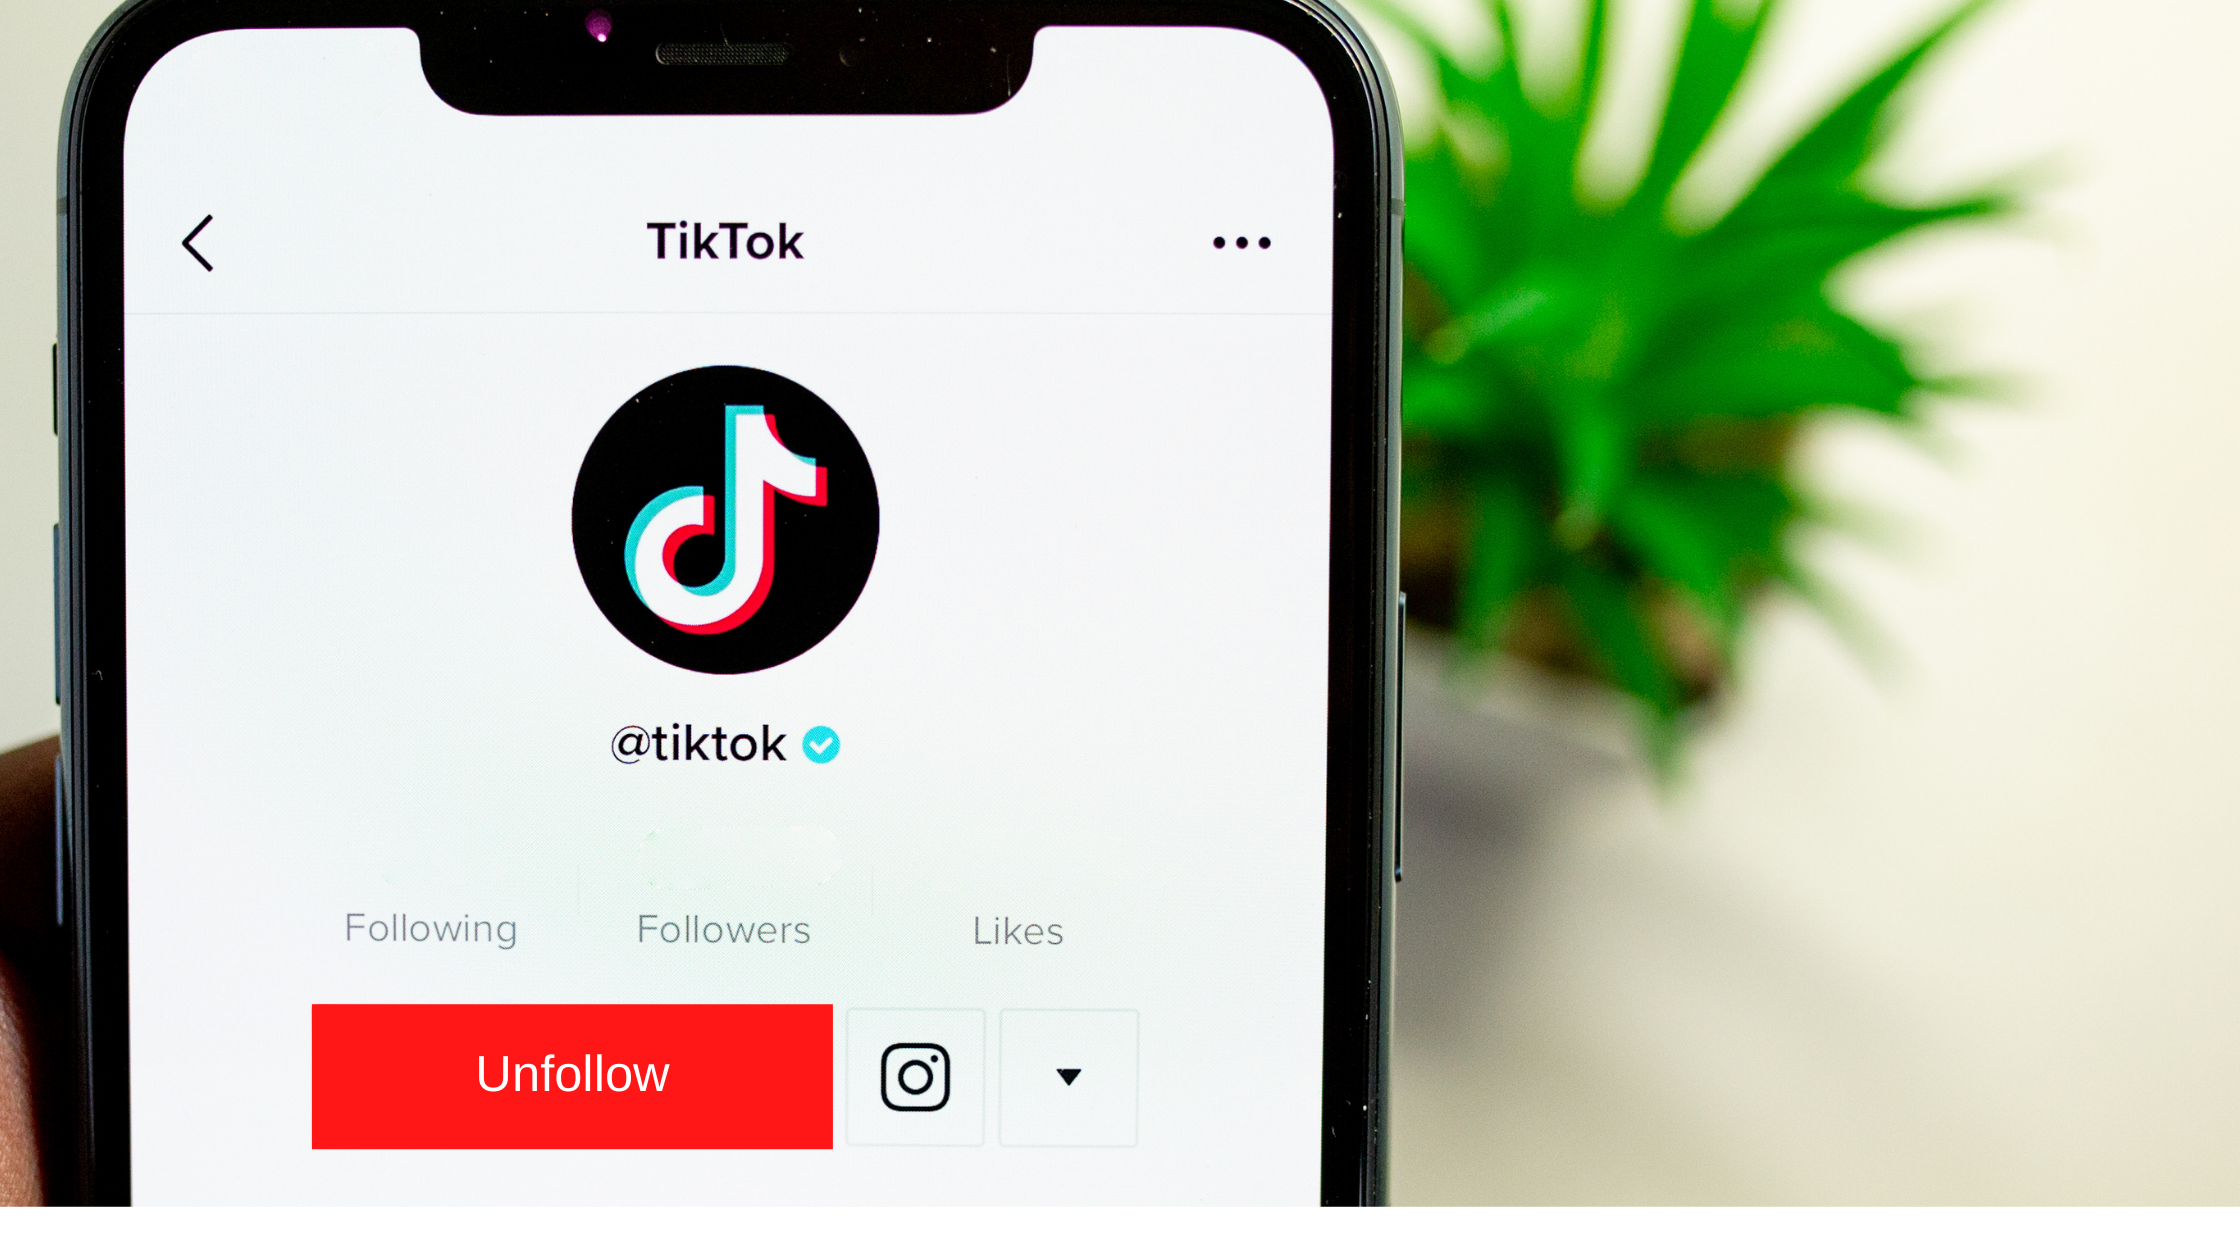 How to unfollow users in TikTok?